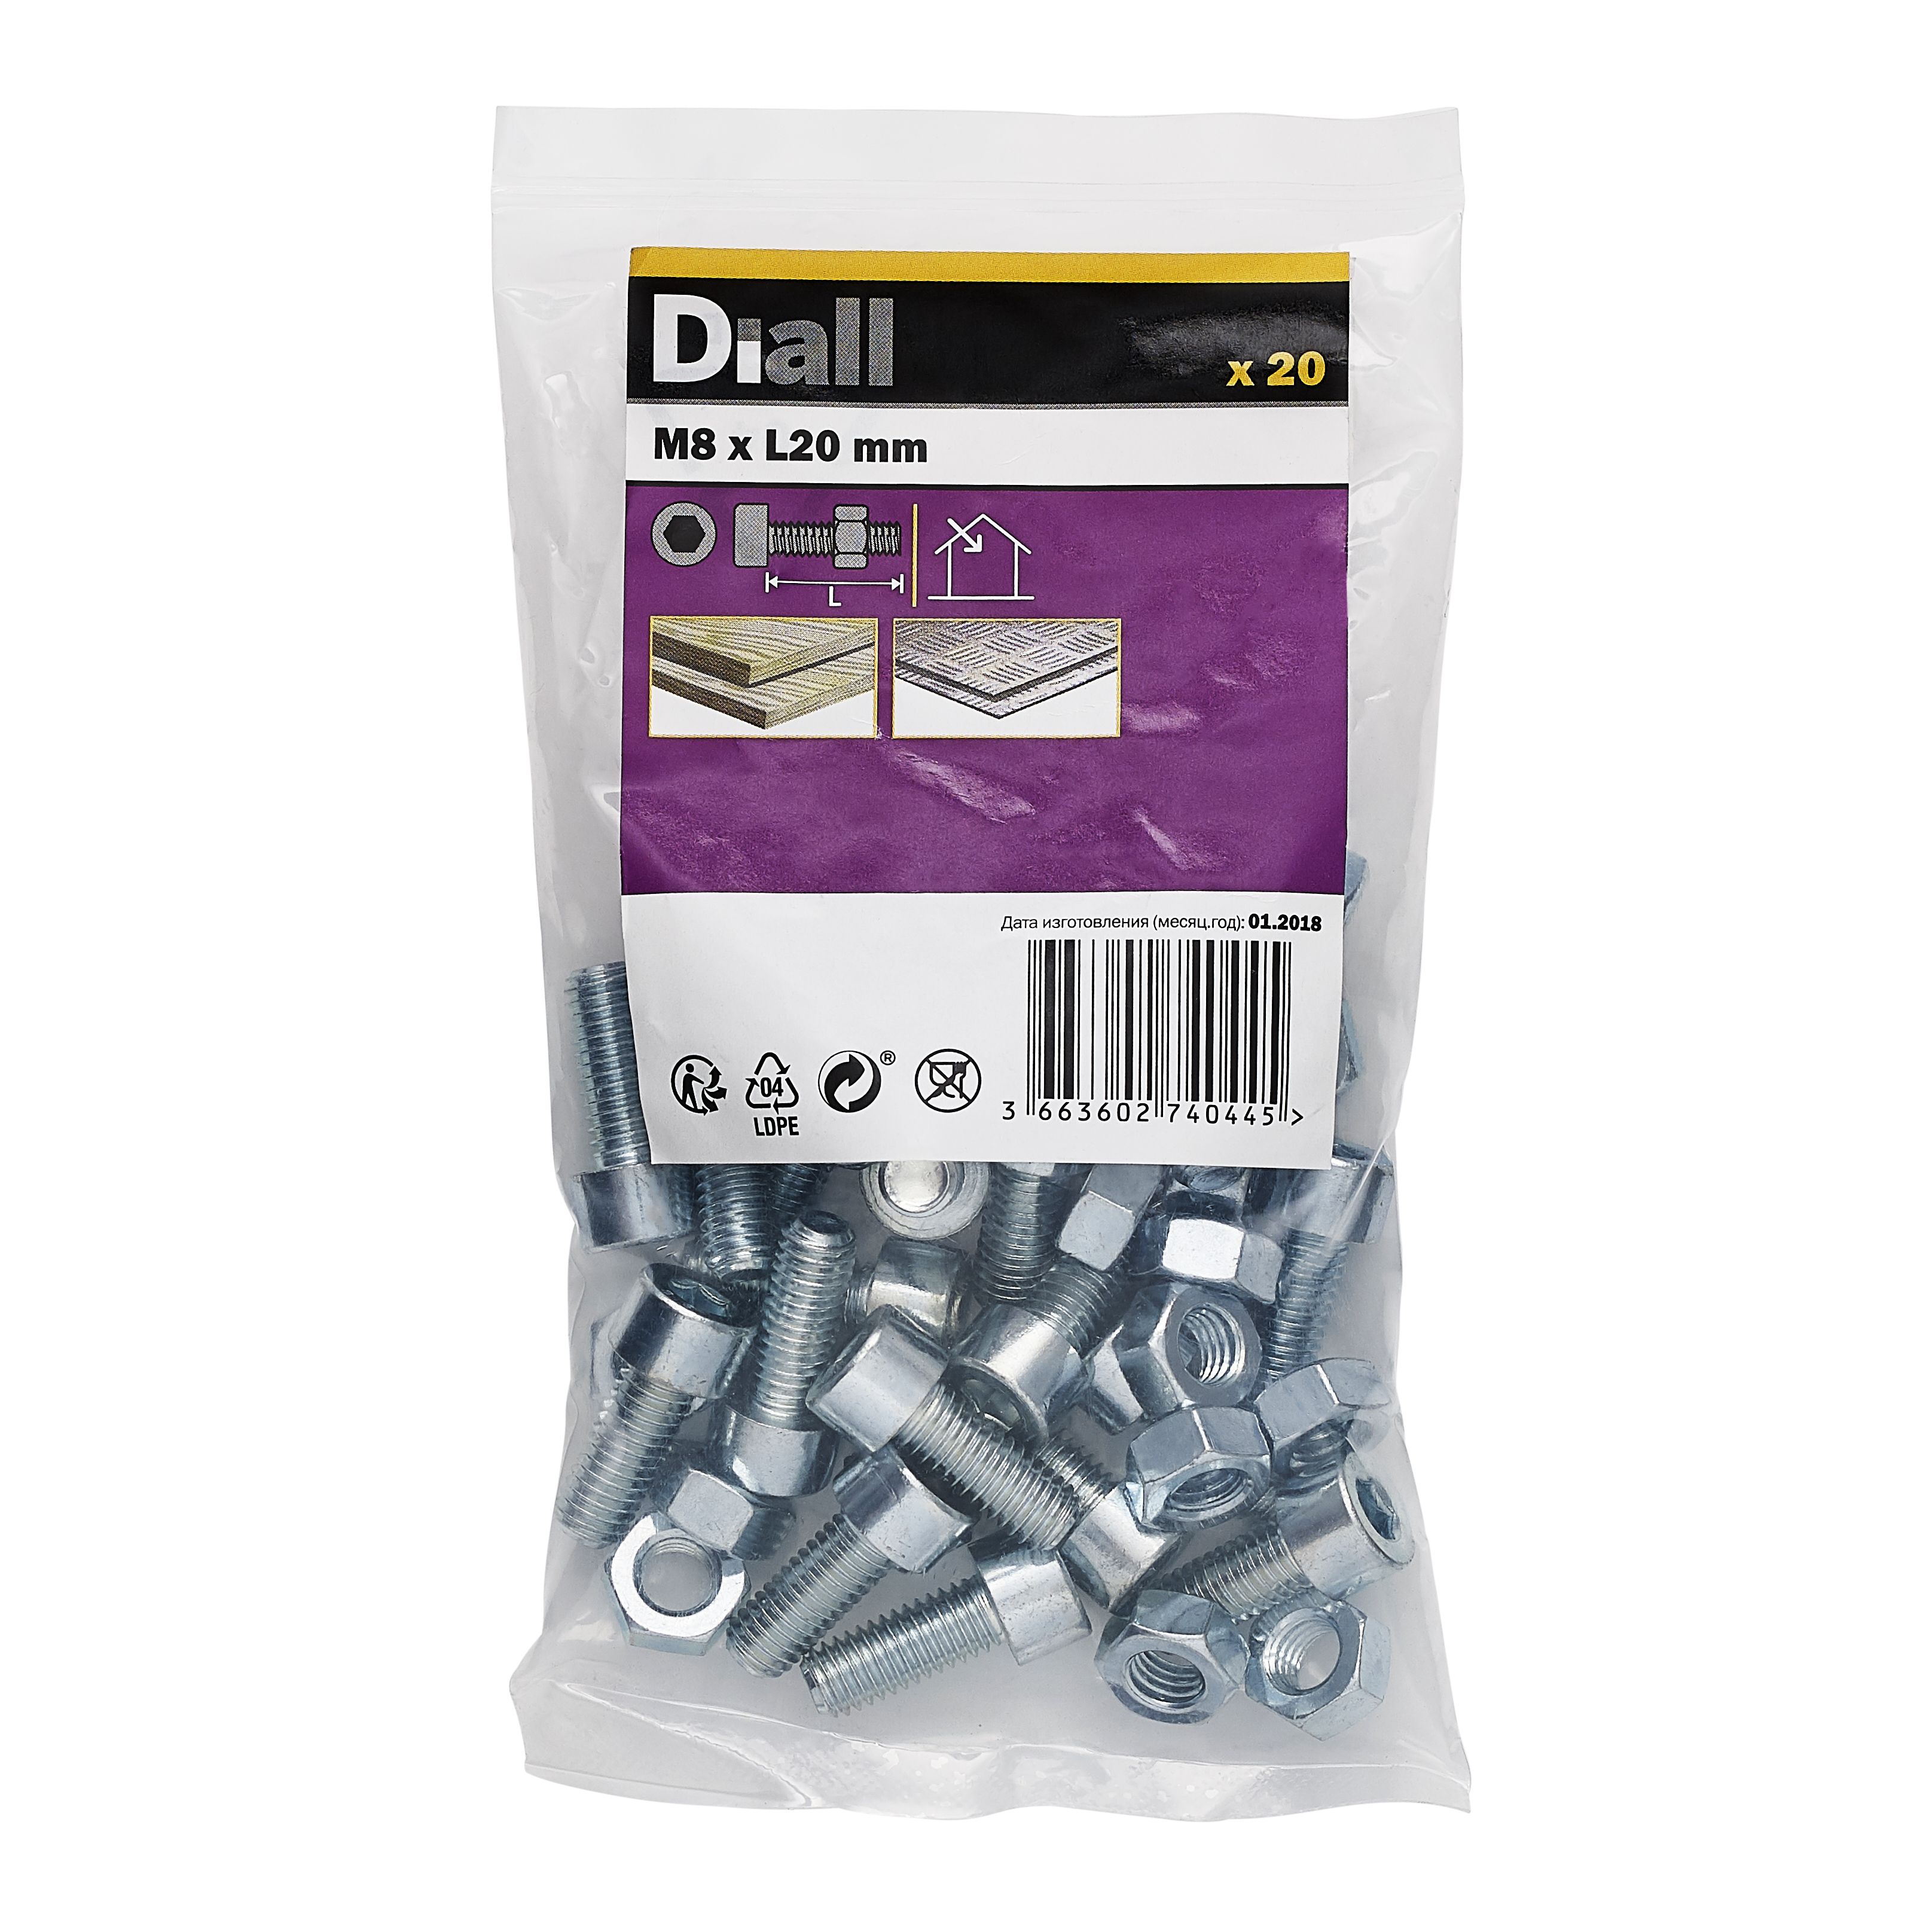 Diall M8 Cylindrical Zinc-plated Carbon steel Set screw & nut (L)20mm, Pack of 20